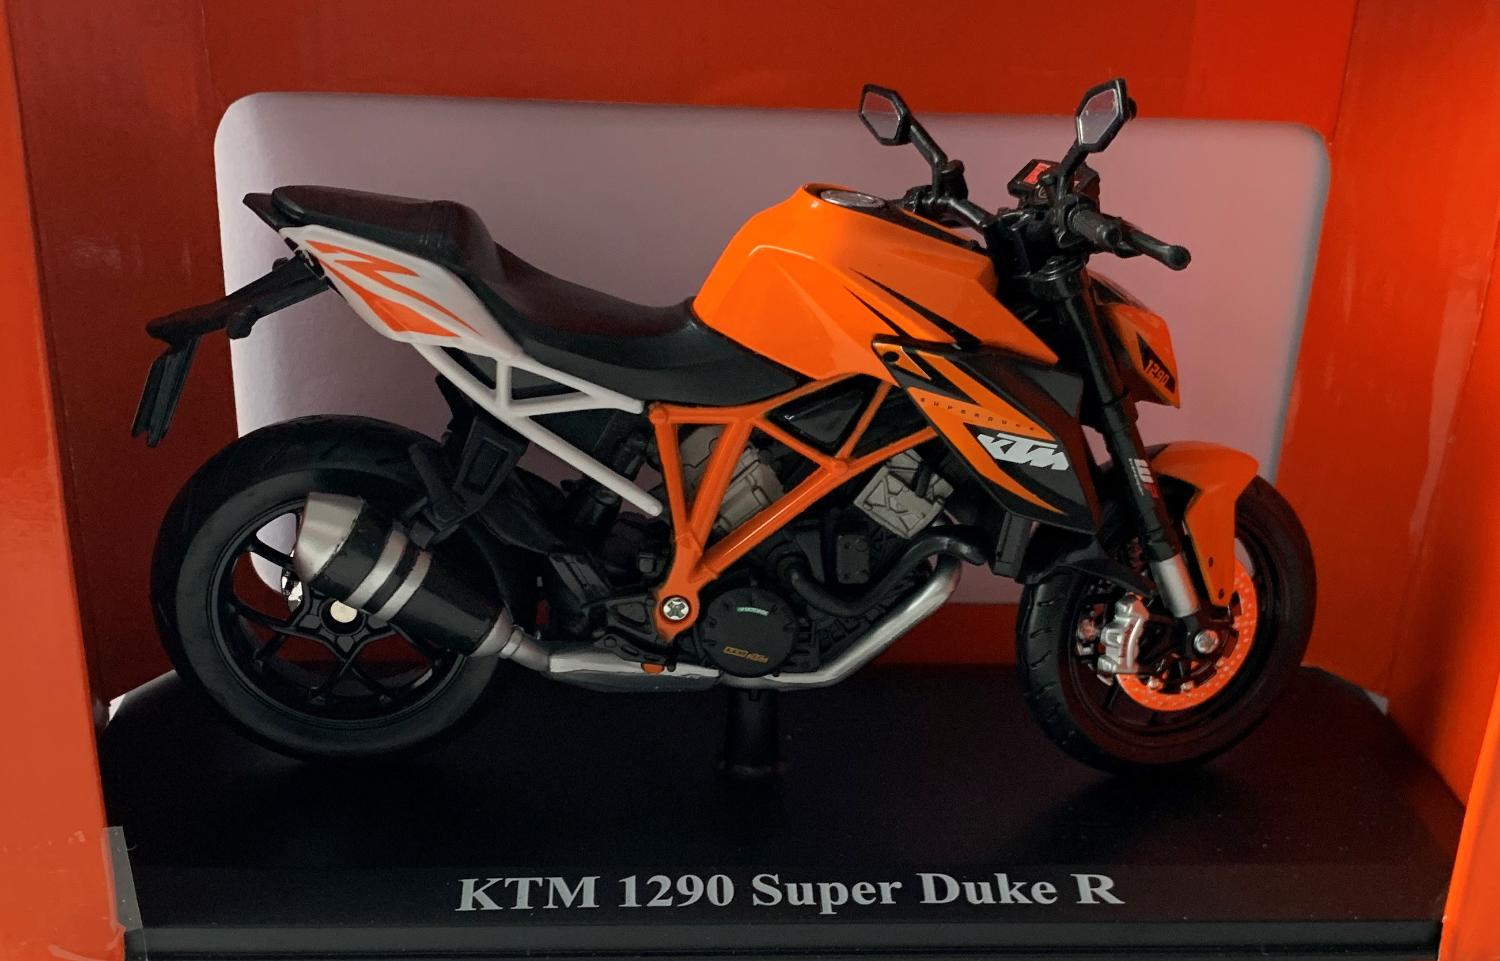 KTM 1290 Super Duke R in orange / black 1:12 scale model from Maisto , mounted on a plinth and presented in orange KTM themed box.